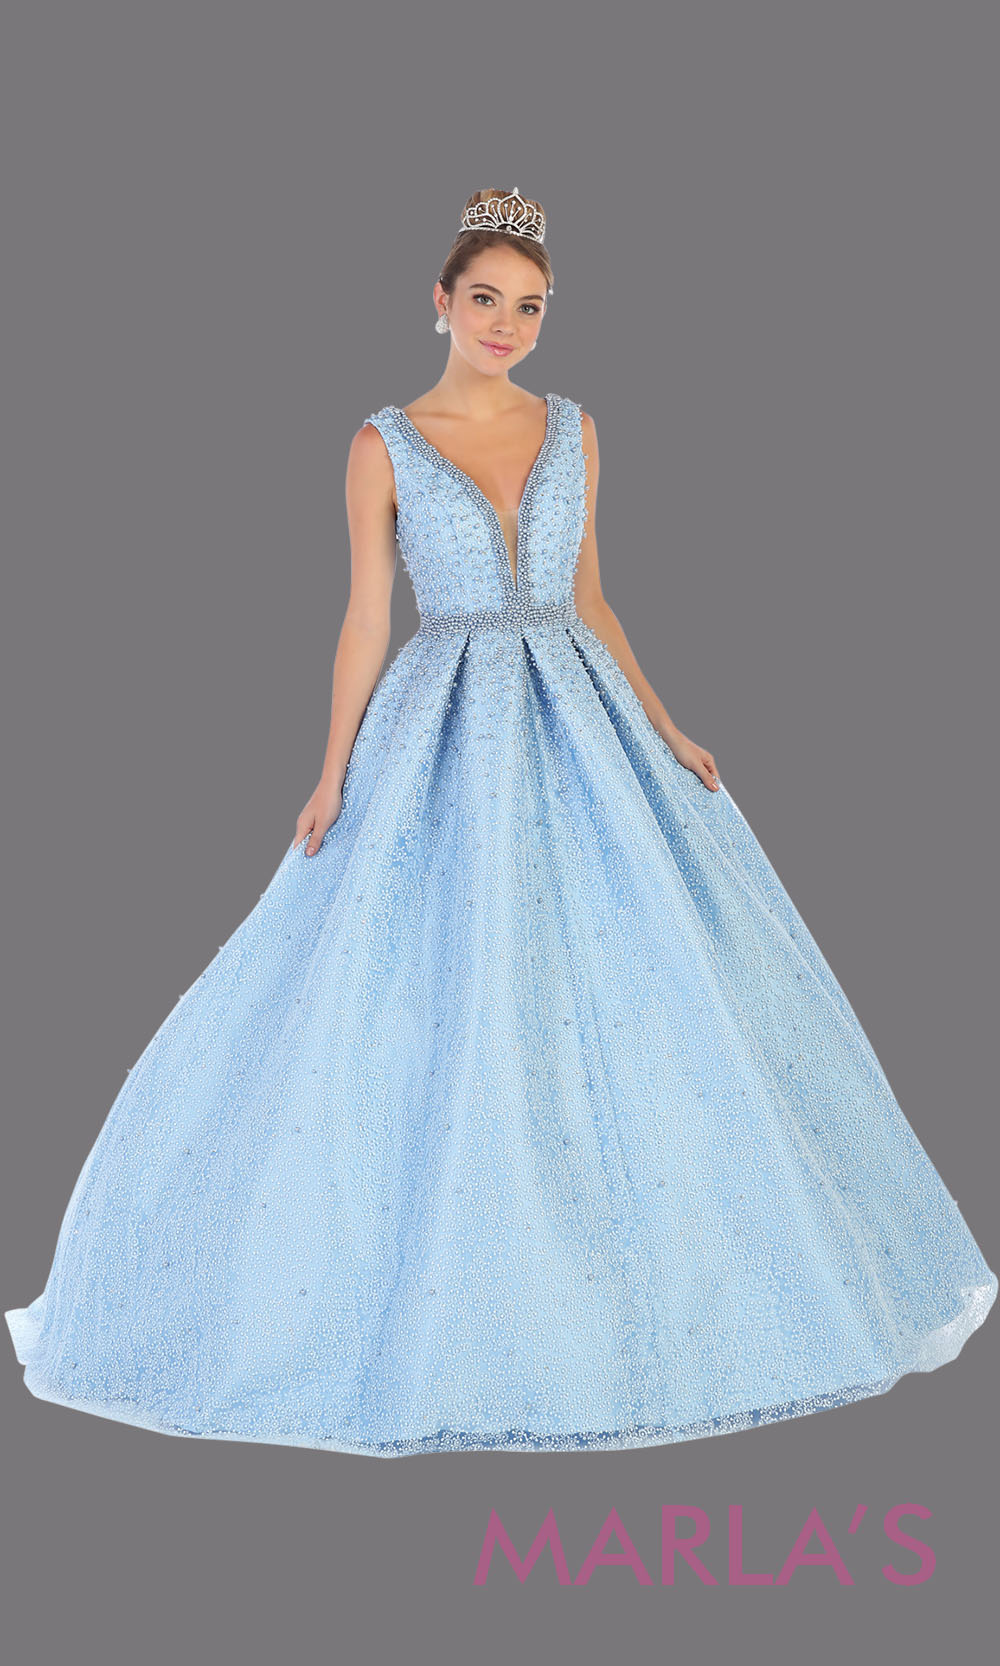 Long aqua blue princess quinceanera v neck ball gown with straps.Perfect for light blue Engagement ballgown dress, Quinceanera, Sweet 16, Sweet 15, Debut and blue Wedding bridal Reception Dress. Available in plus sizes.